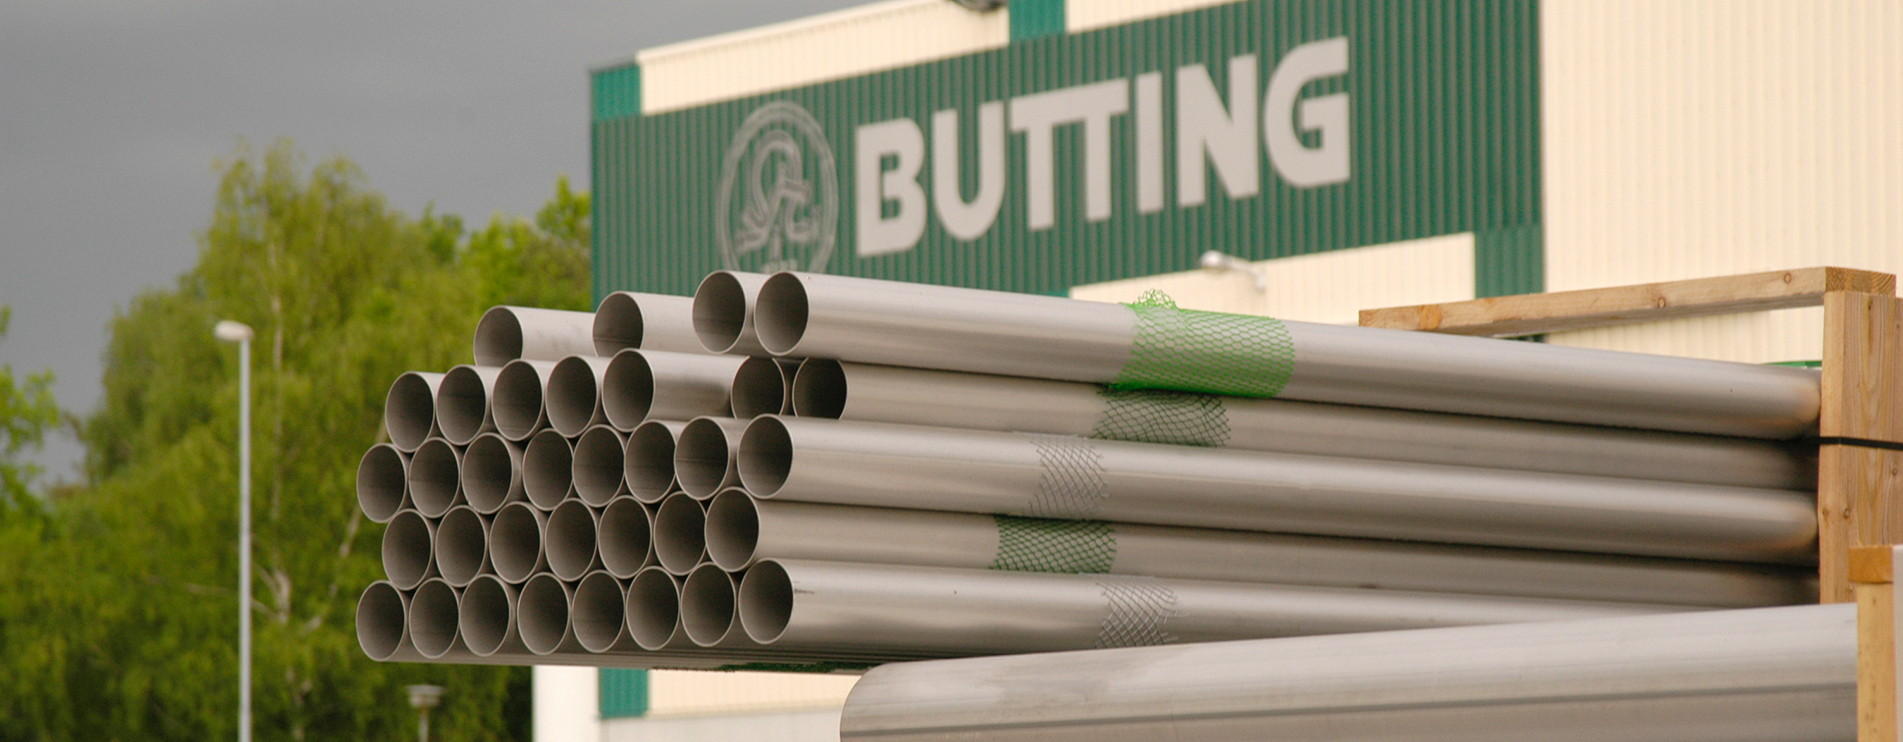 H. BUTTING GmbH & Co. KG